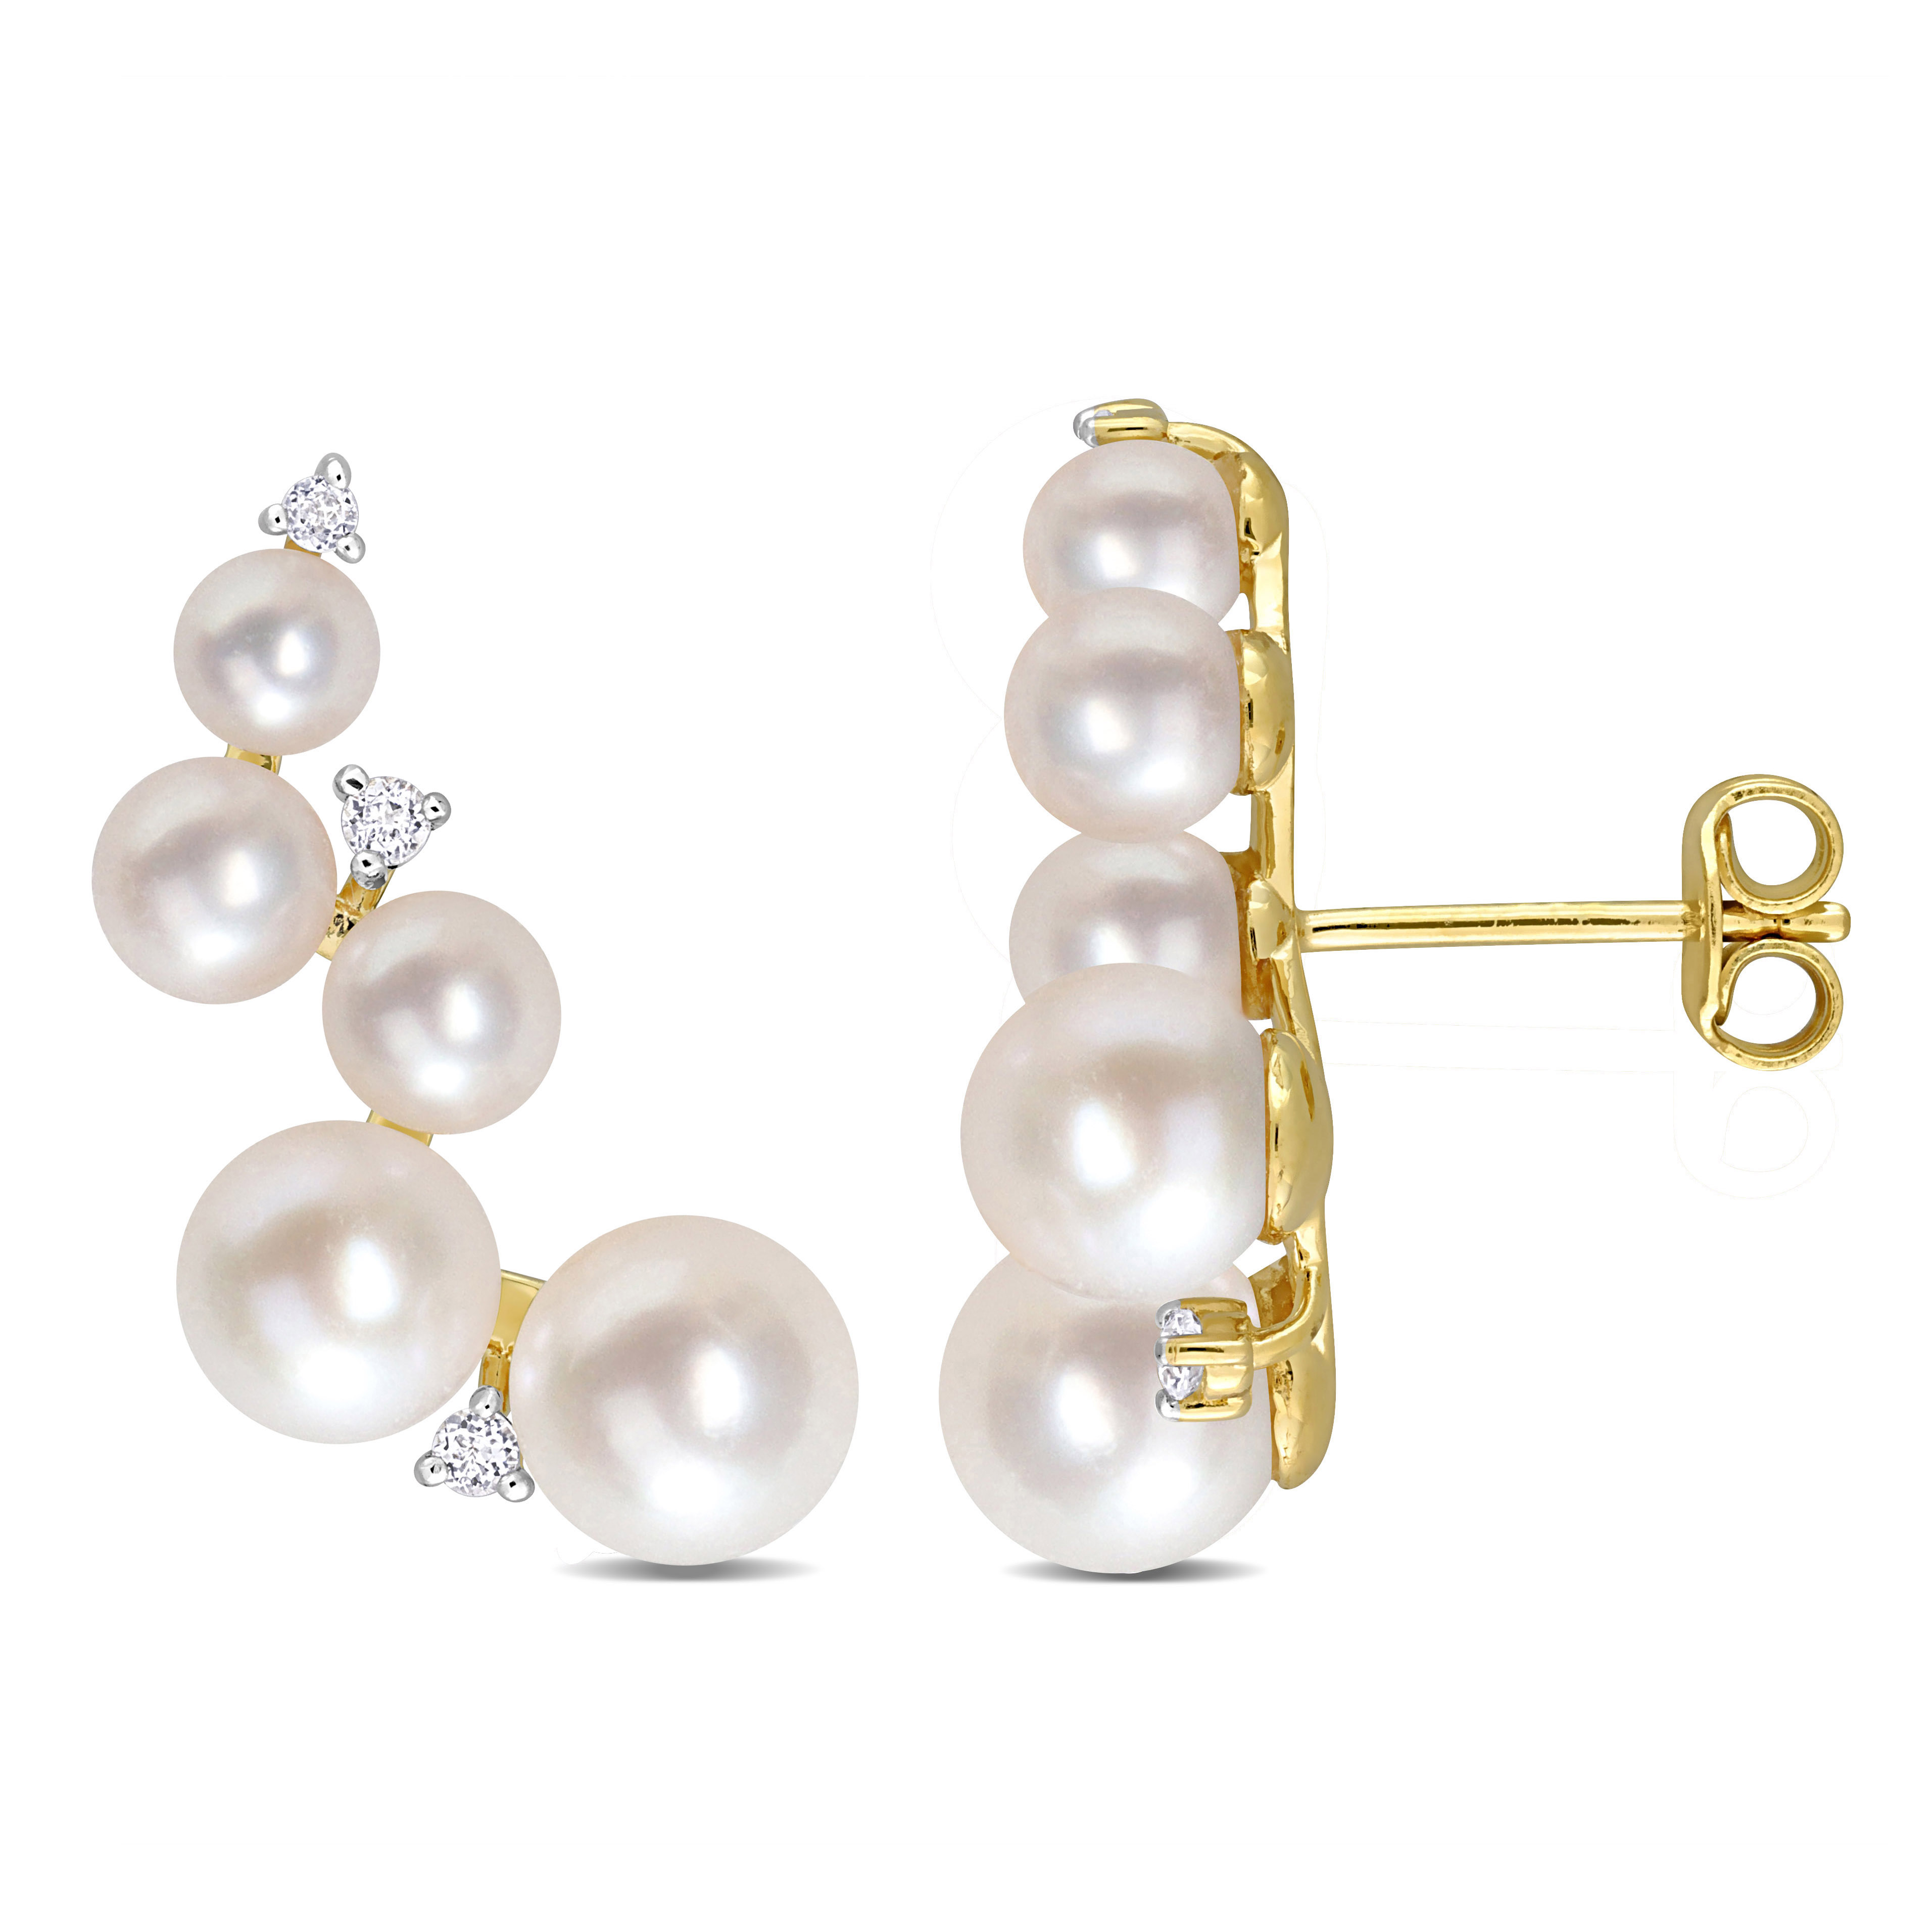 Freshwater Cultured Pearl and 1/4 CT TGW White Topaz Climber Earrings in Yellow Gold Plated Sterling Silver